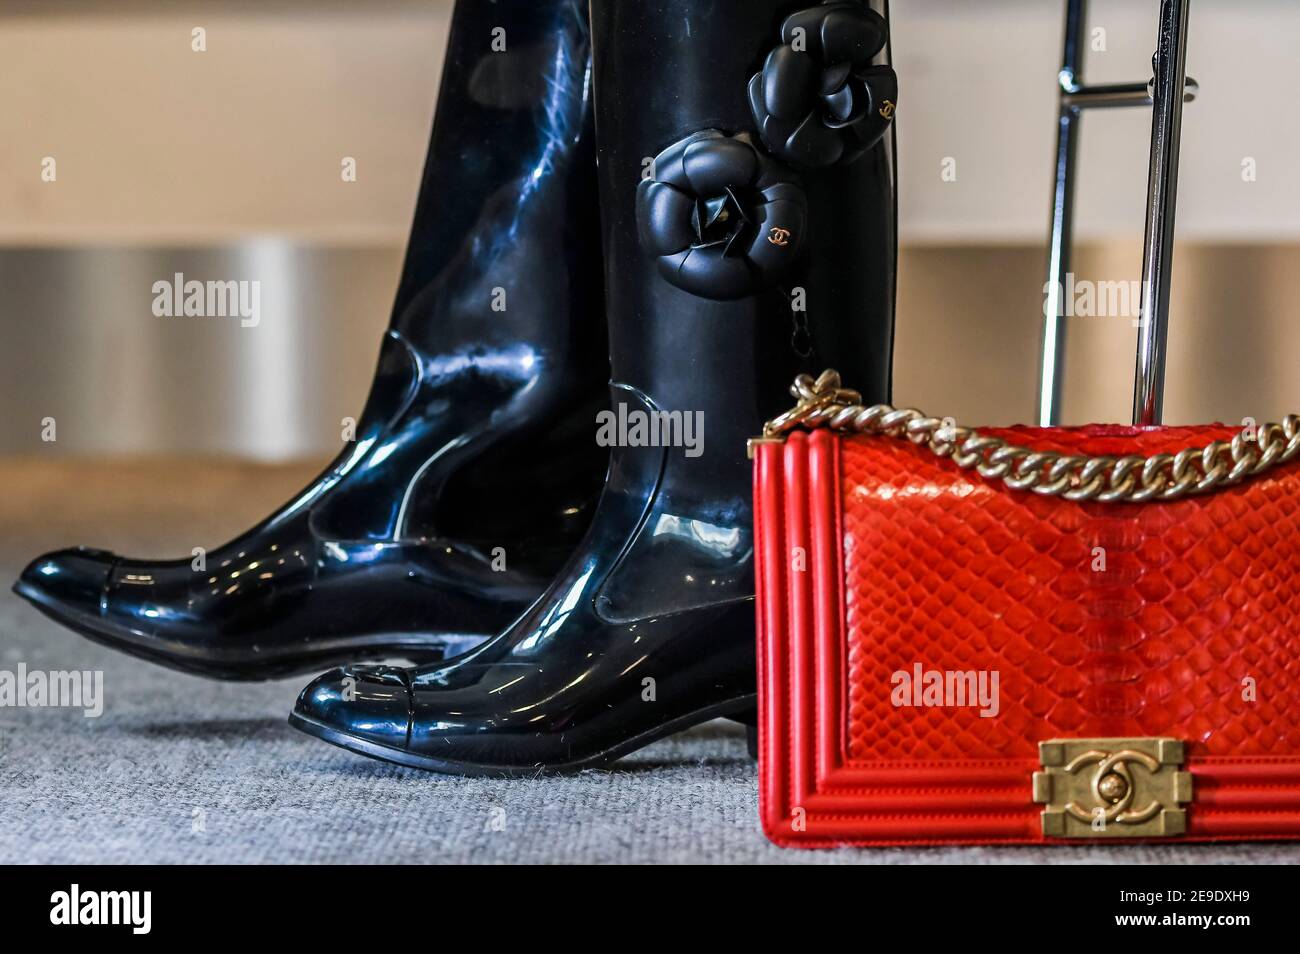 London, 4th Feb, 2021. Designer Wellington Boots by Chanel with Camellia design (part of set 2 pairs) est £200-300 with a Red Python Boy Bag, Chanel, c. 2014,